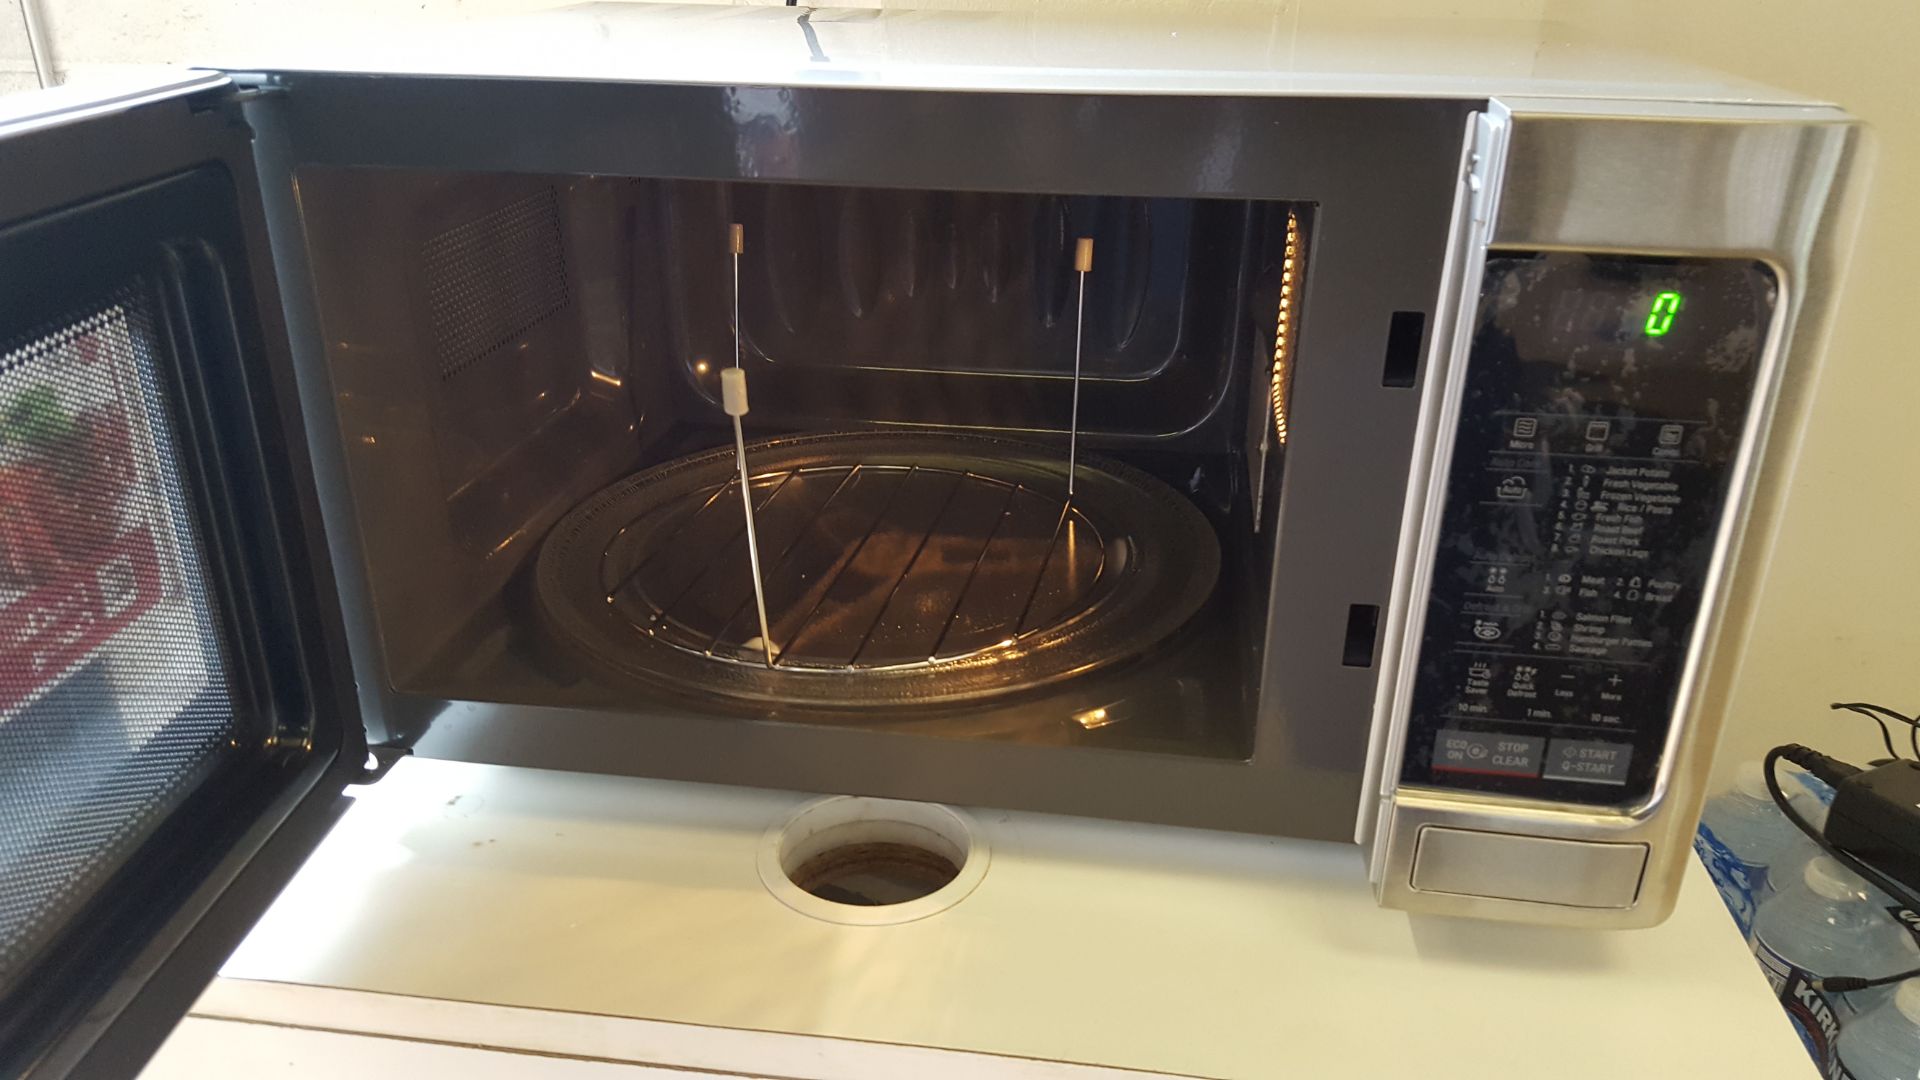 LG MH7042X Microwave Oven With Grill 28L - Image 2 of 4